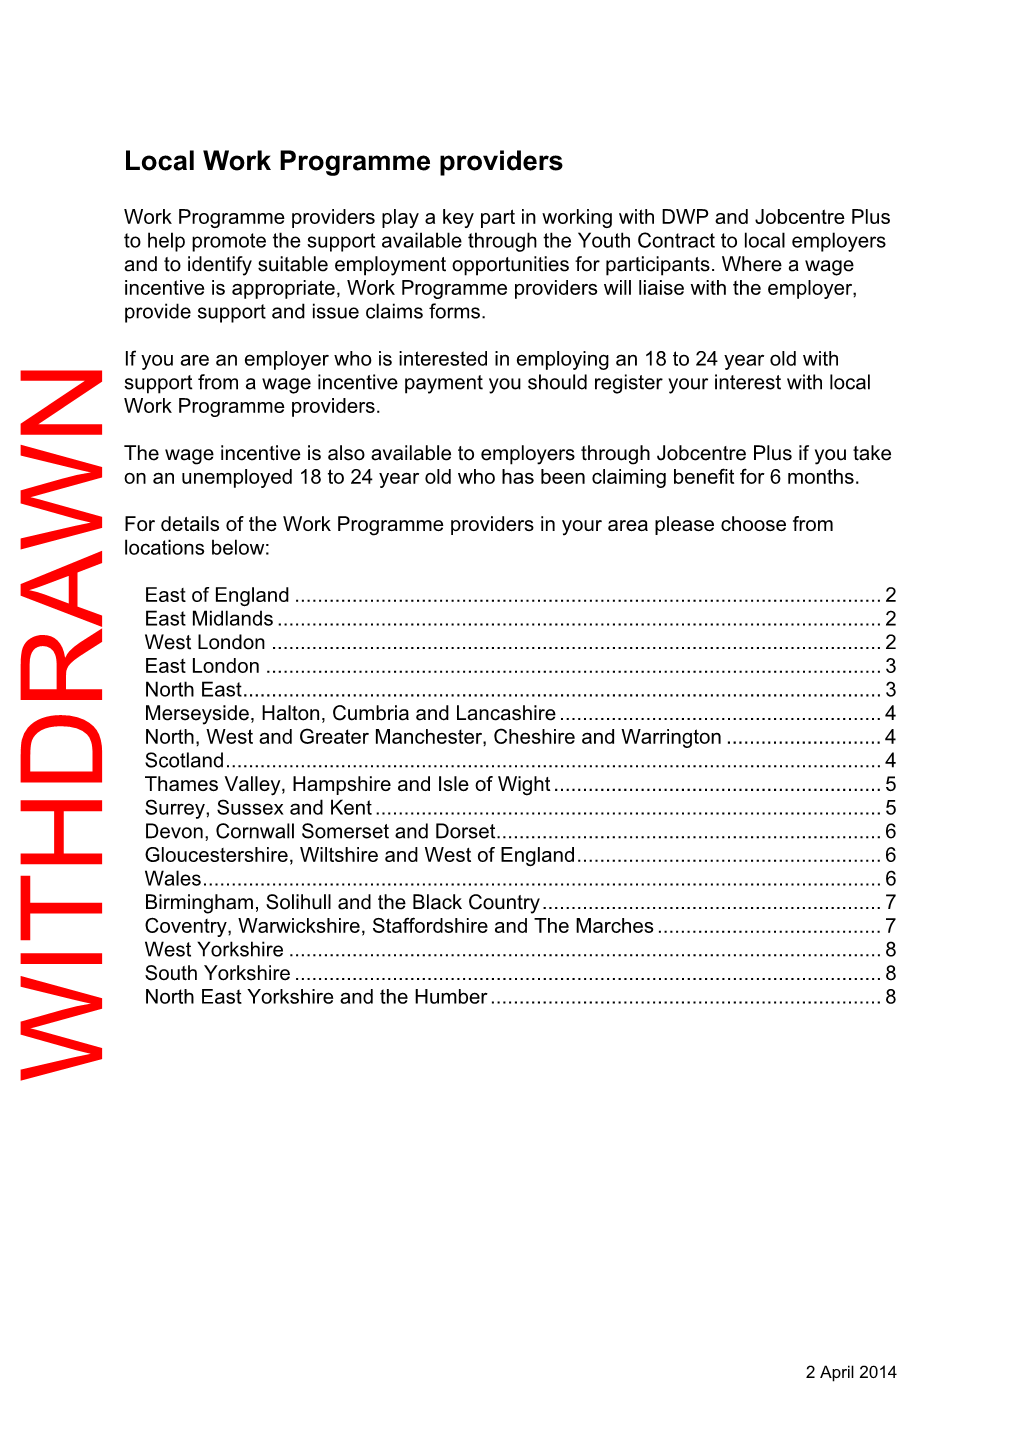 Local Work Programme Providers